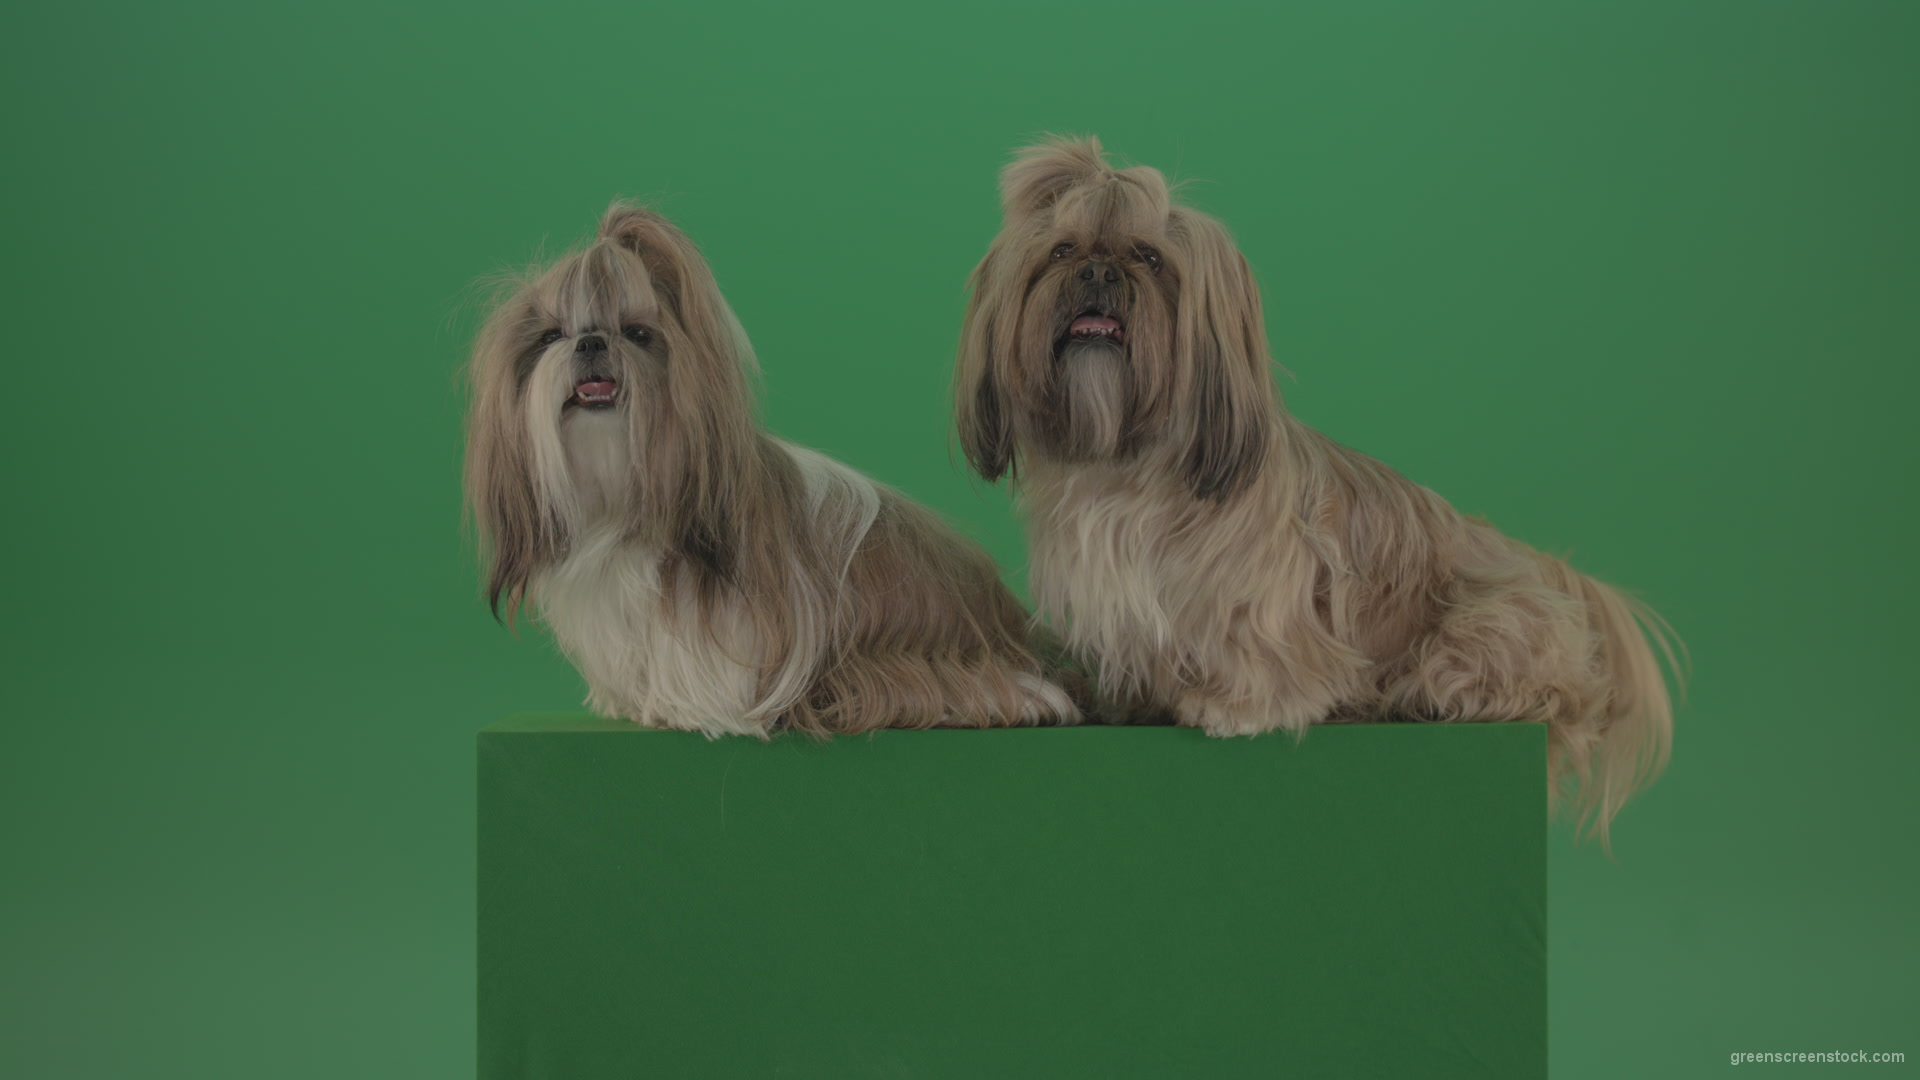 Awards-winners-Shih-tzu-fashion-luxury-expensive-dog-in-side-view-isolated-on-green-screen_002 Green Screen Stock